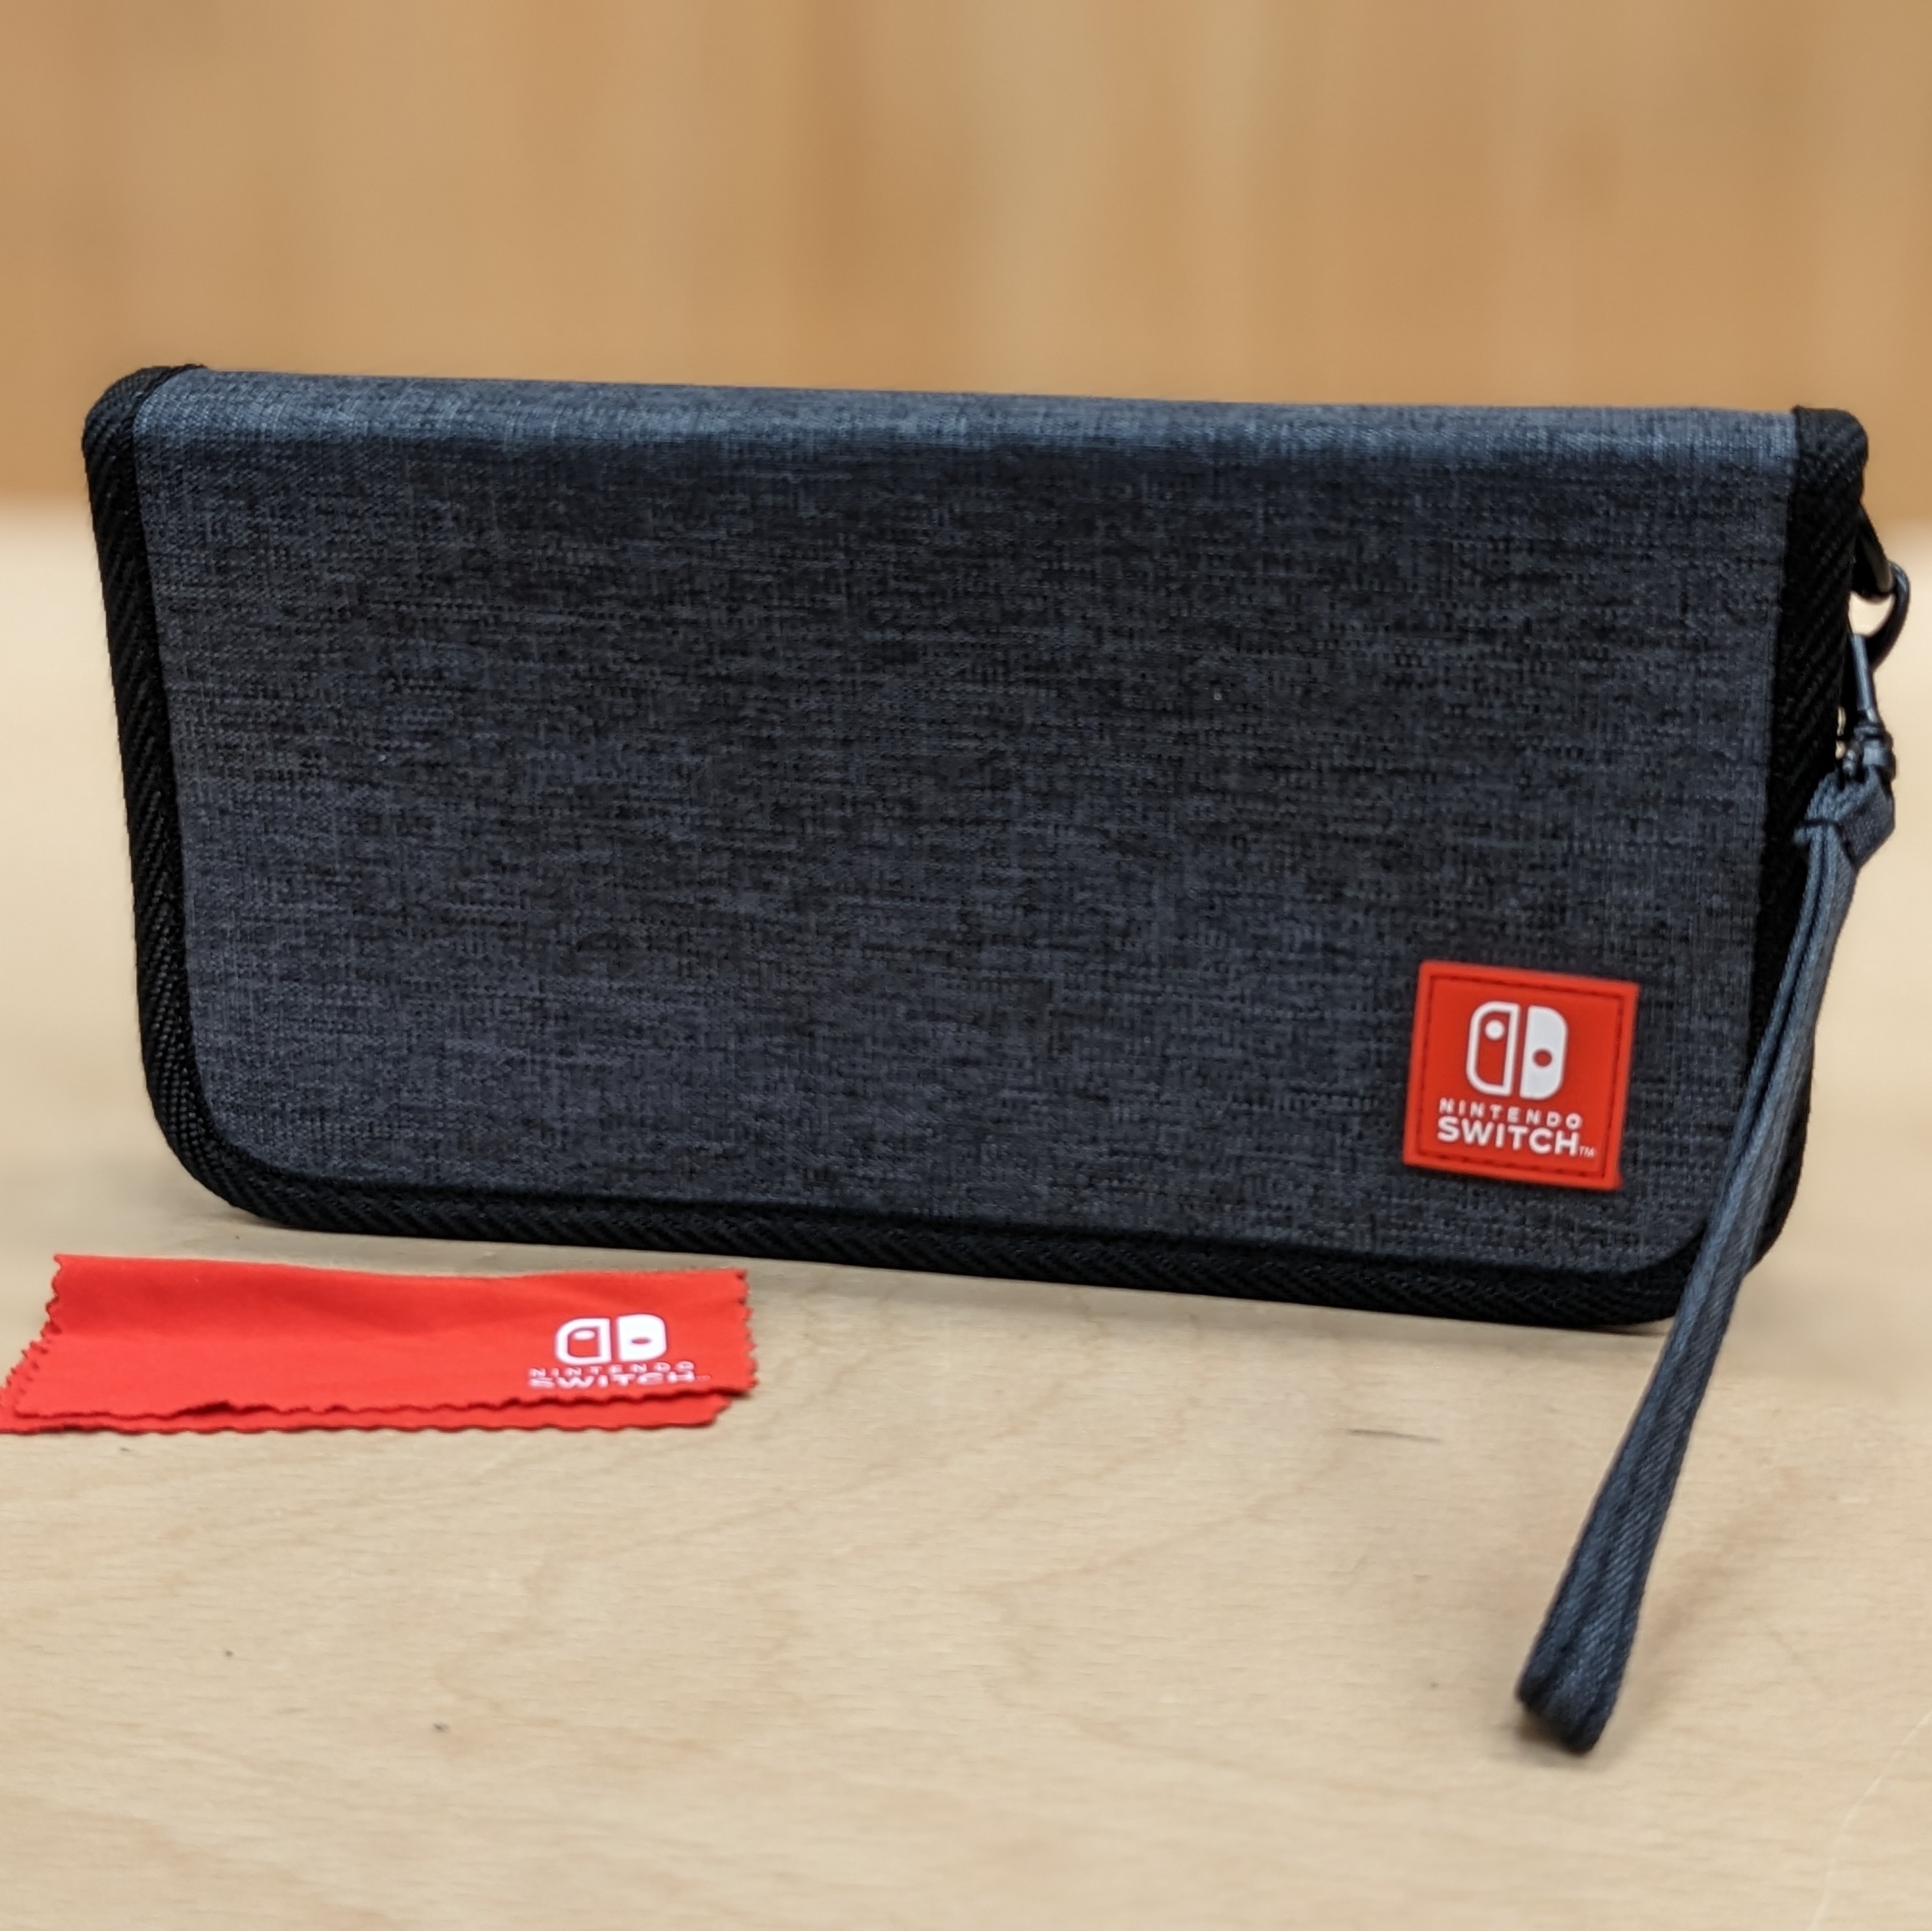 Nintendo Switch carry case official grey fabric with cleaning screen cloth